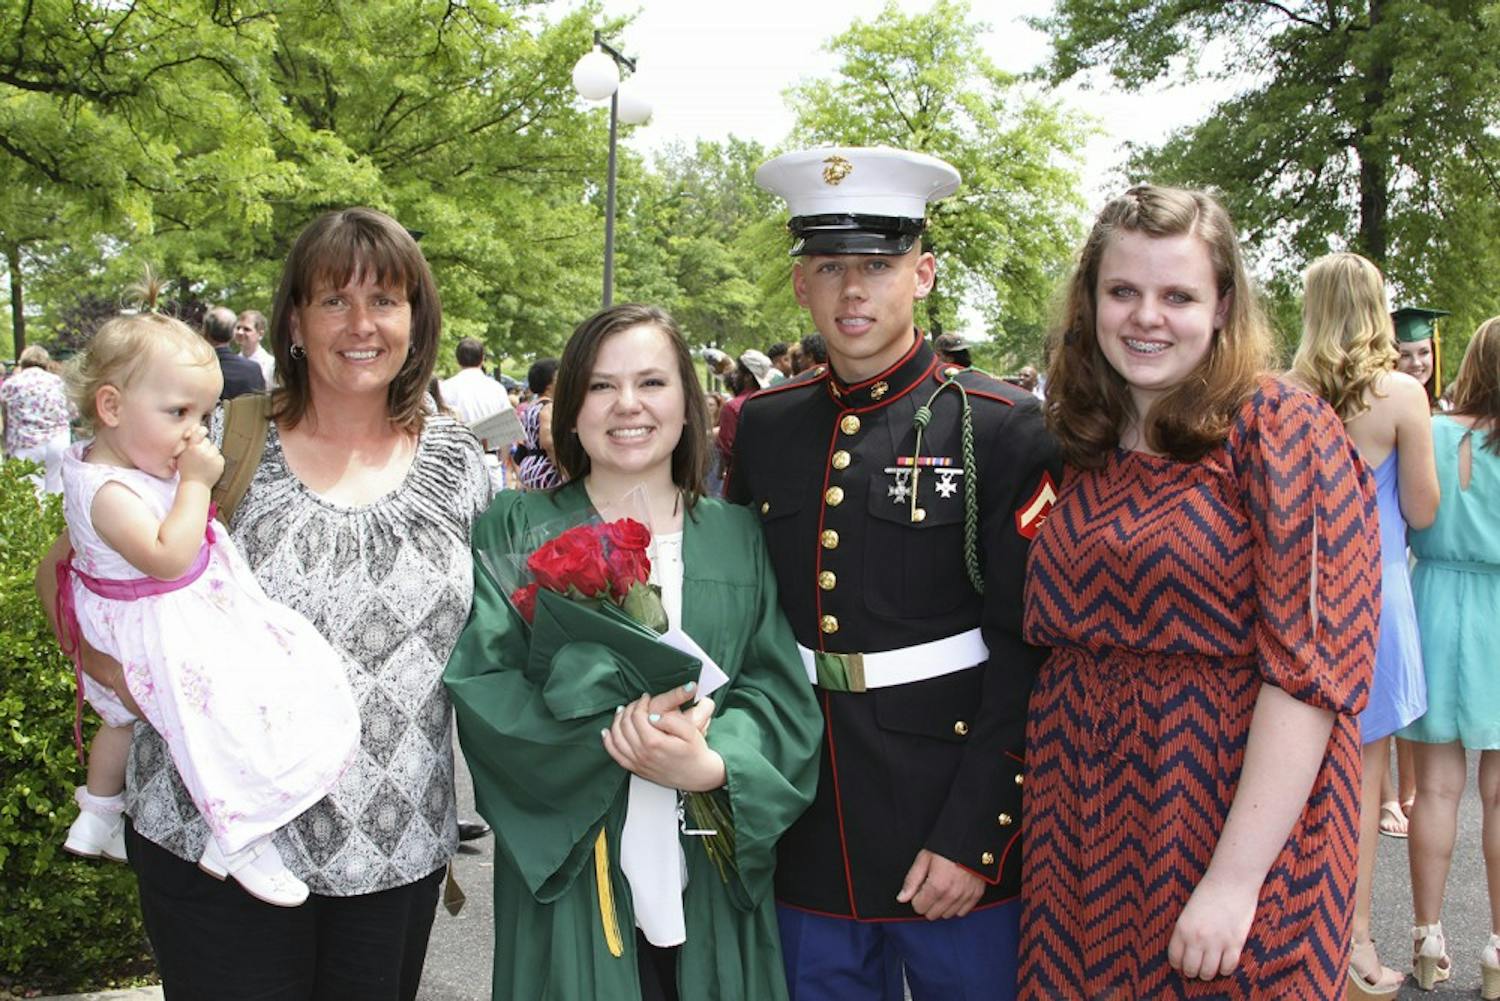 Patti Coyne Powell (second from left), who was diagnosed with cancer, and her children celebrate her daughter’s graduation. Courtesy of Patti Coyne Powell 